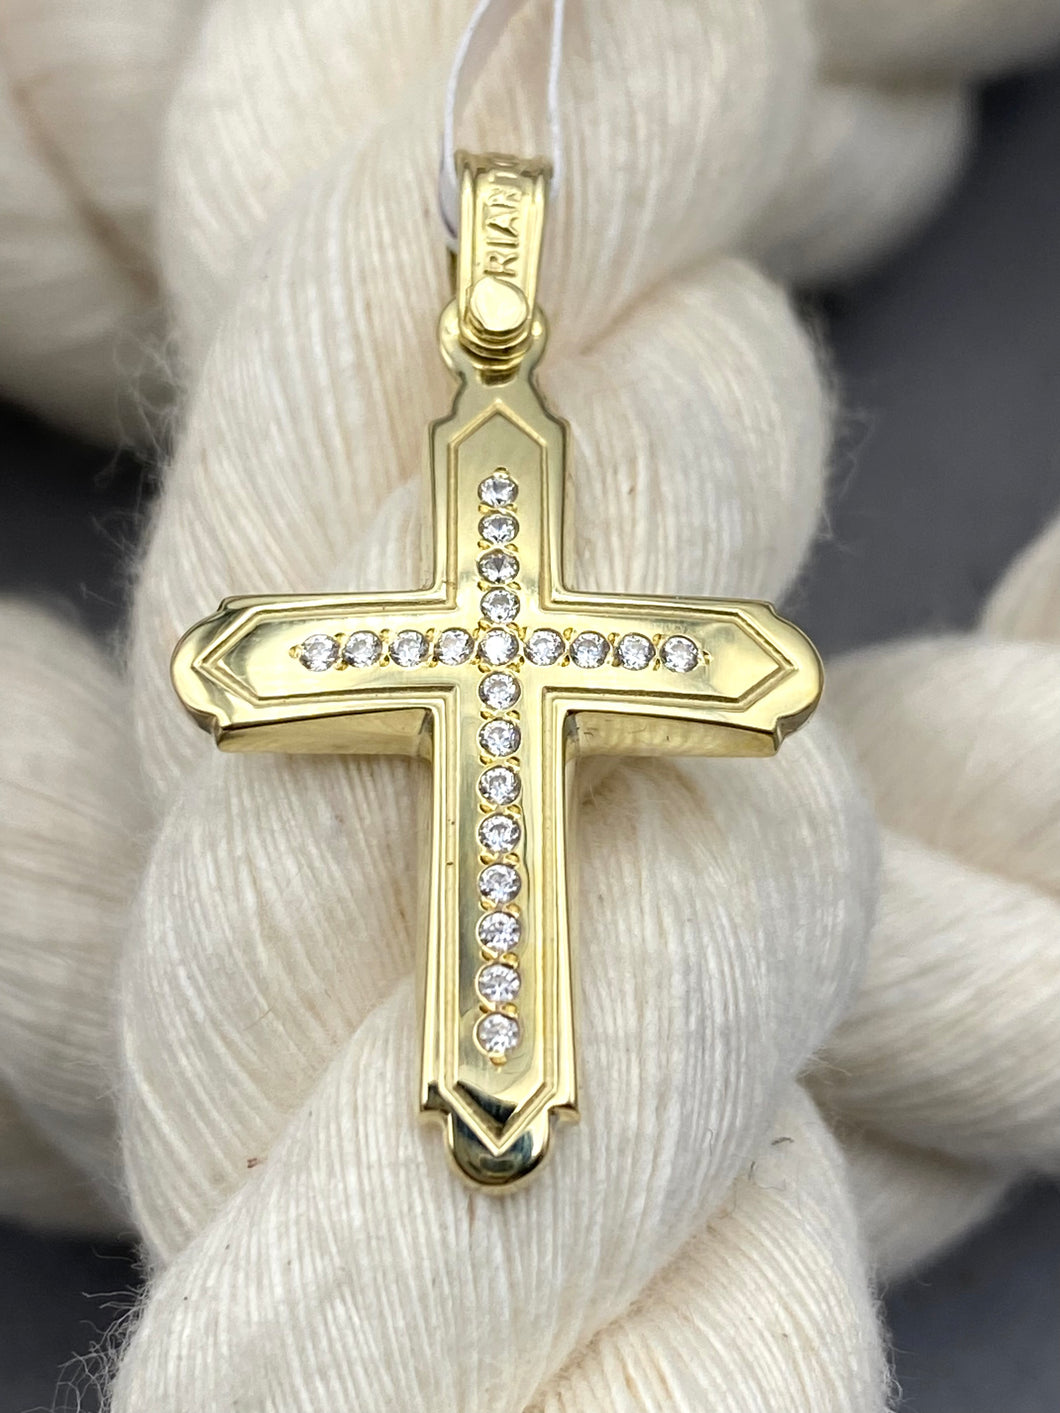 Triantos 14k Yellow Gold Cross Polished and Brushed with Precious Stones 222509